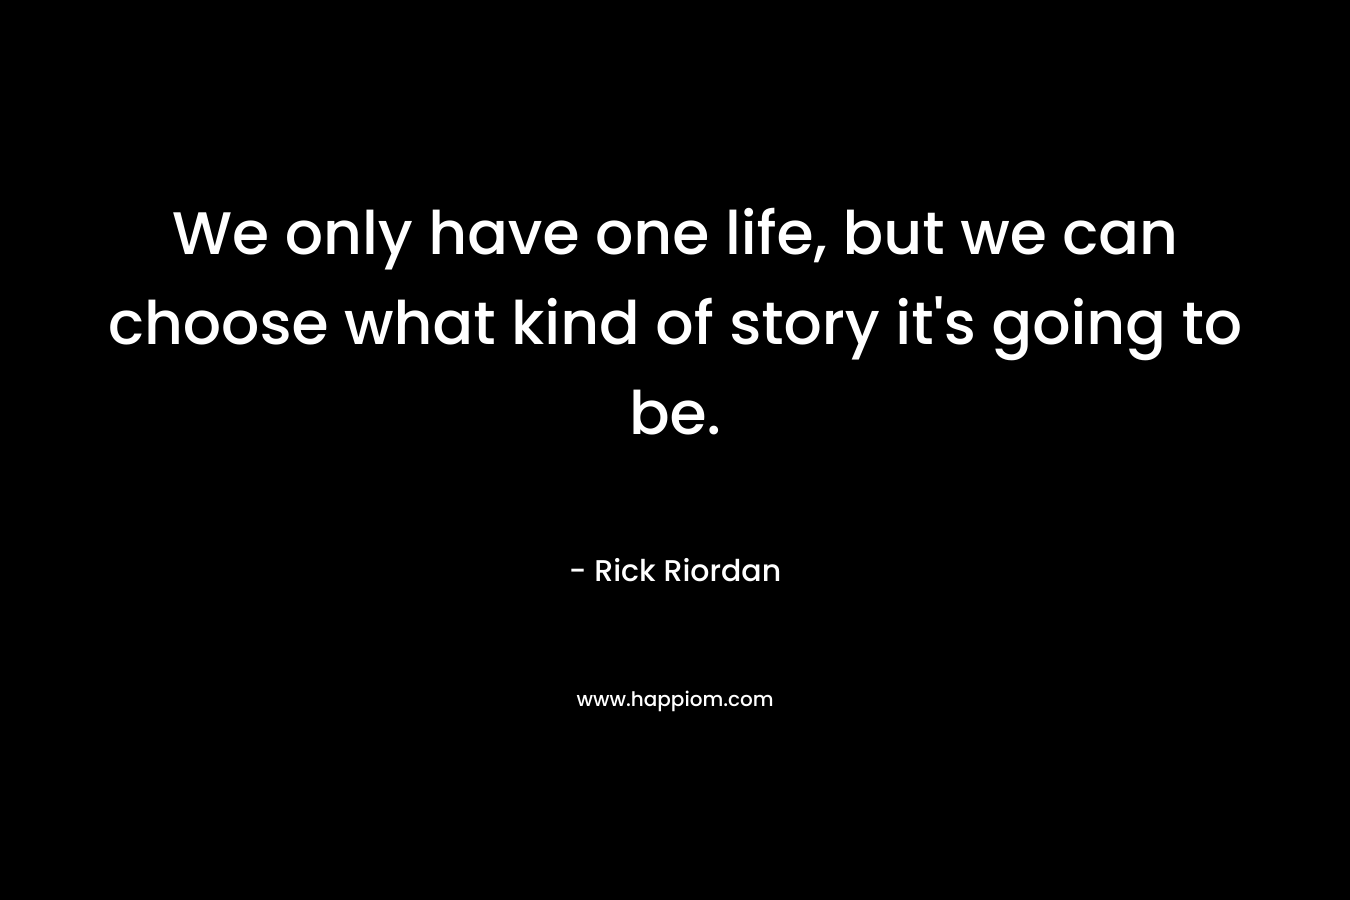 We only have one life, but we can choose what kind of story it's going to be.